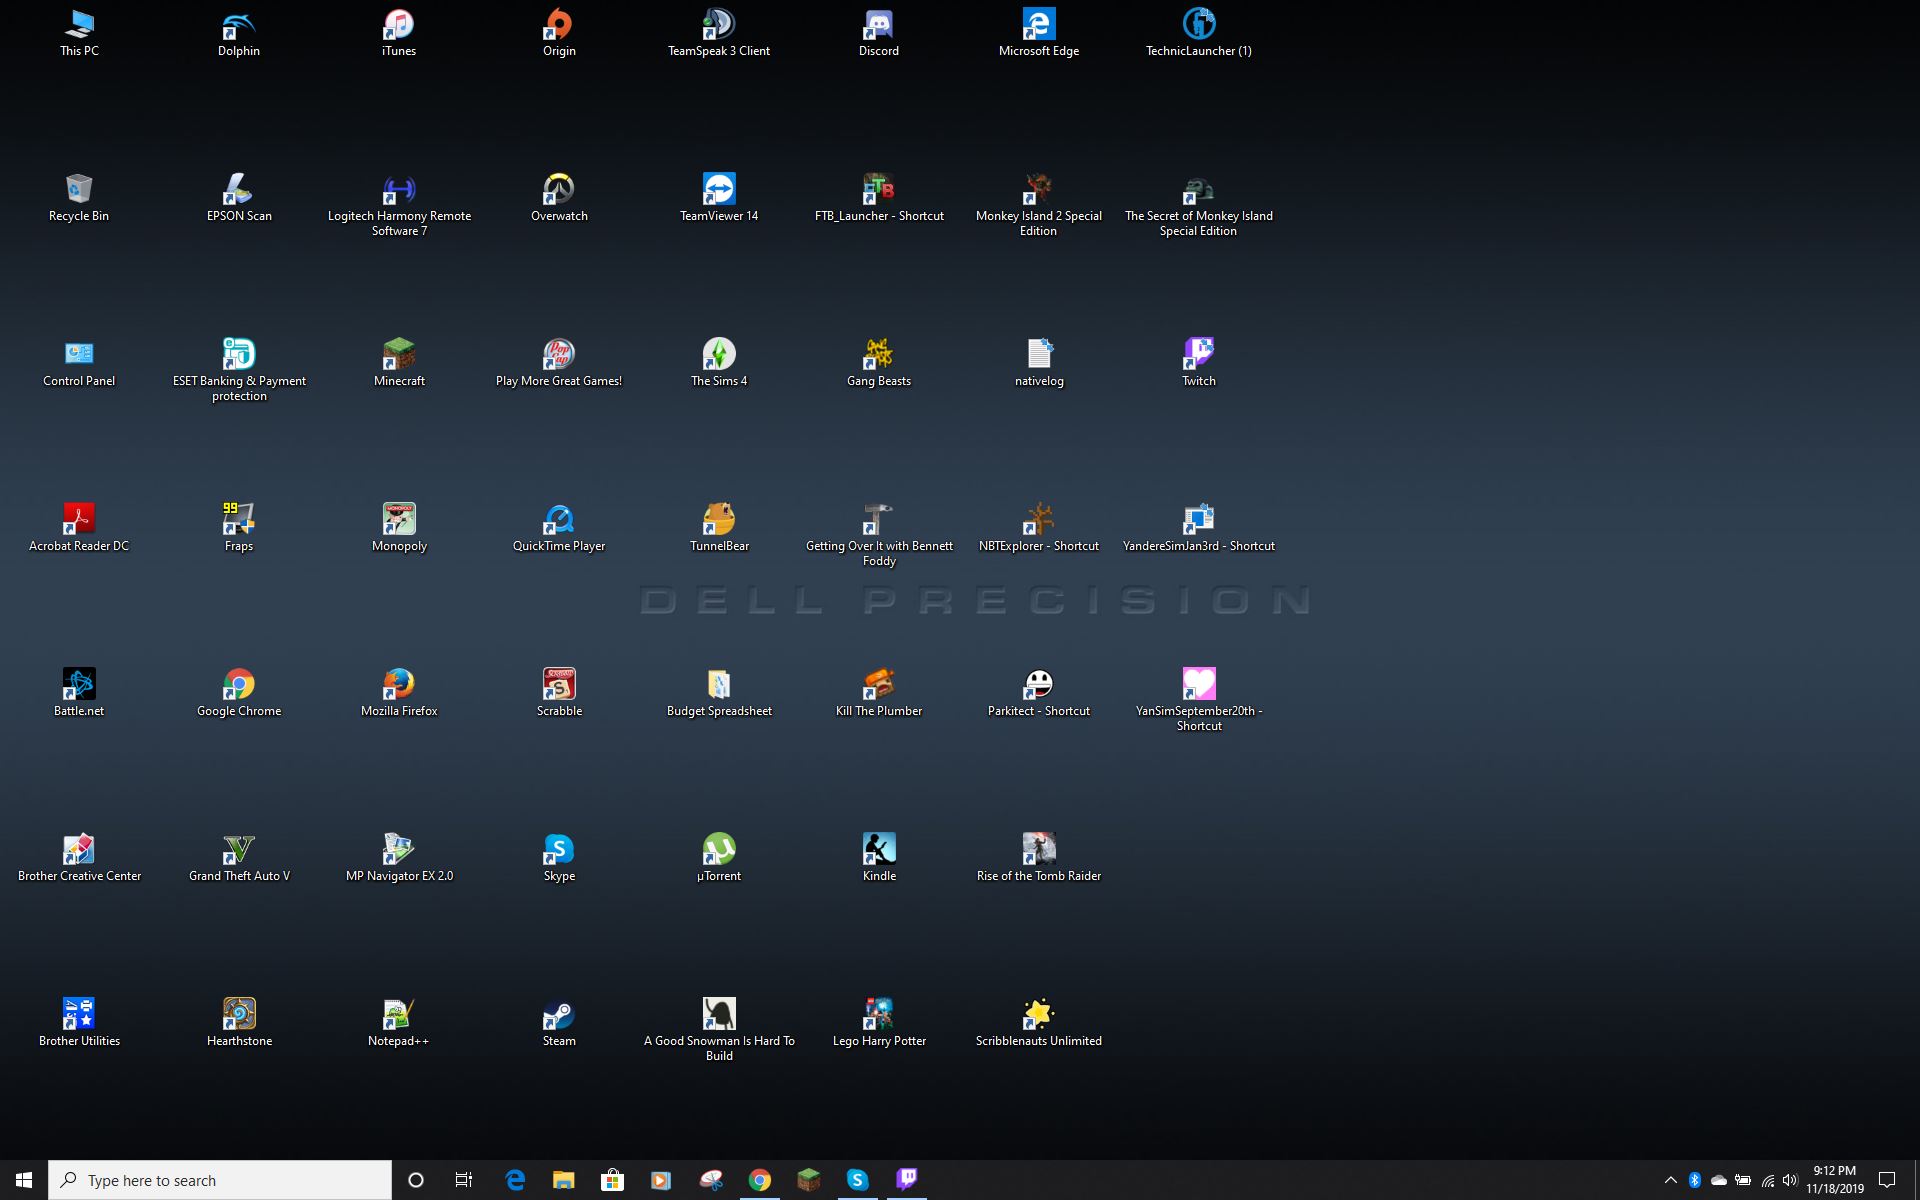 Windows desktop icons are weirdly spaced out. 777284f7-f38c-4278-b67f-6f0343408561?upload=true.jpg